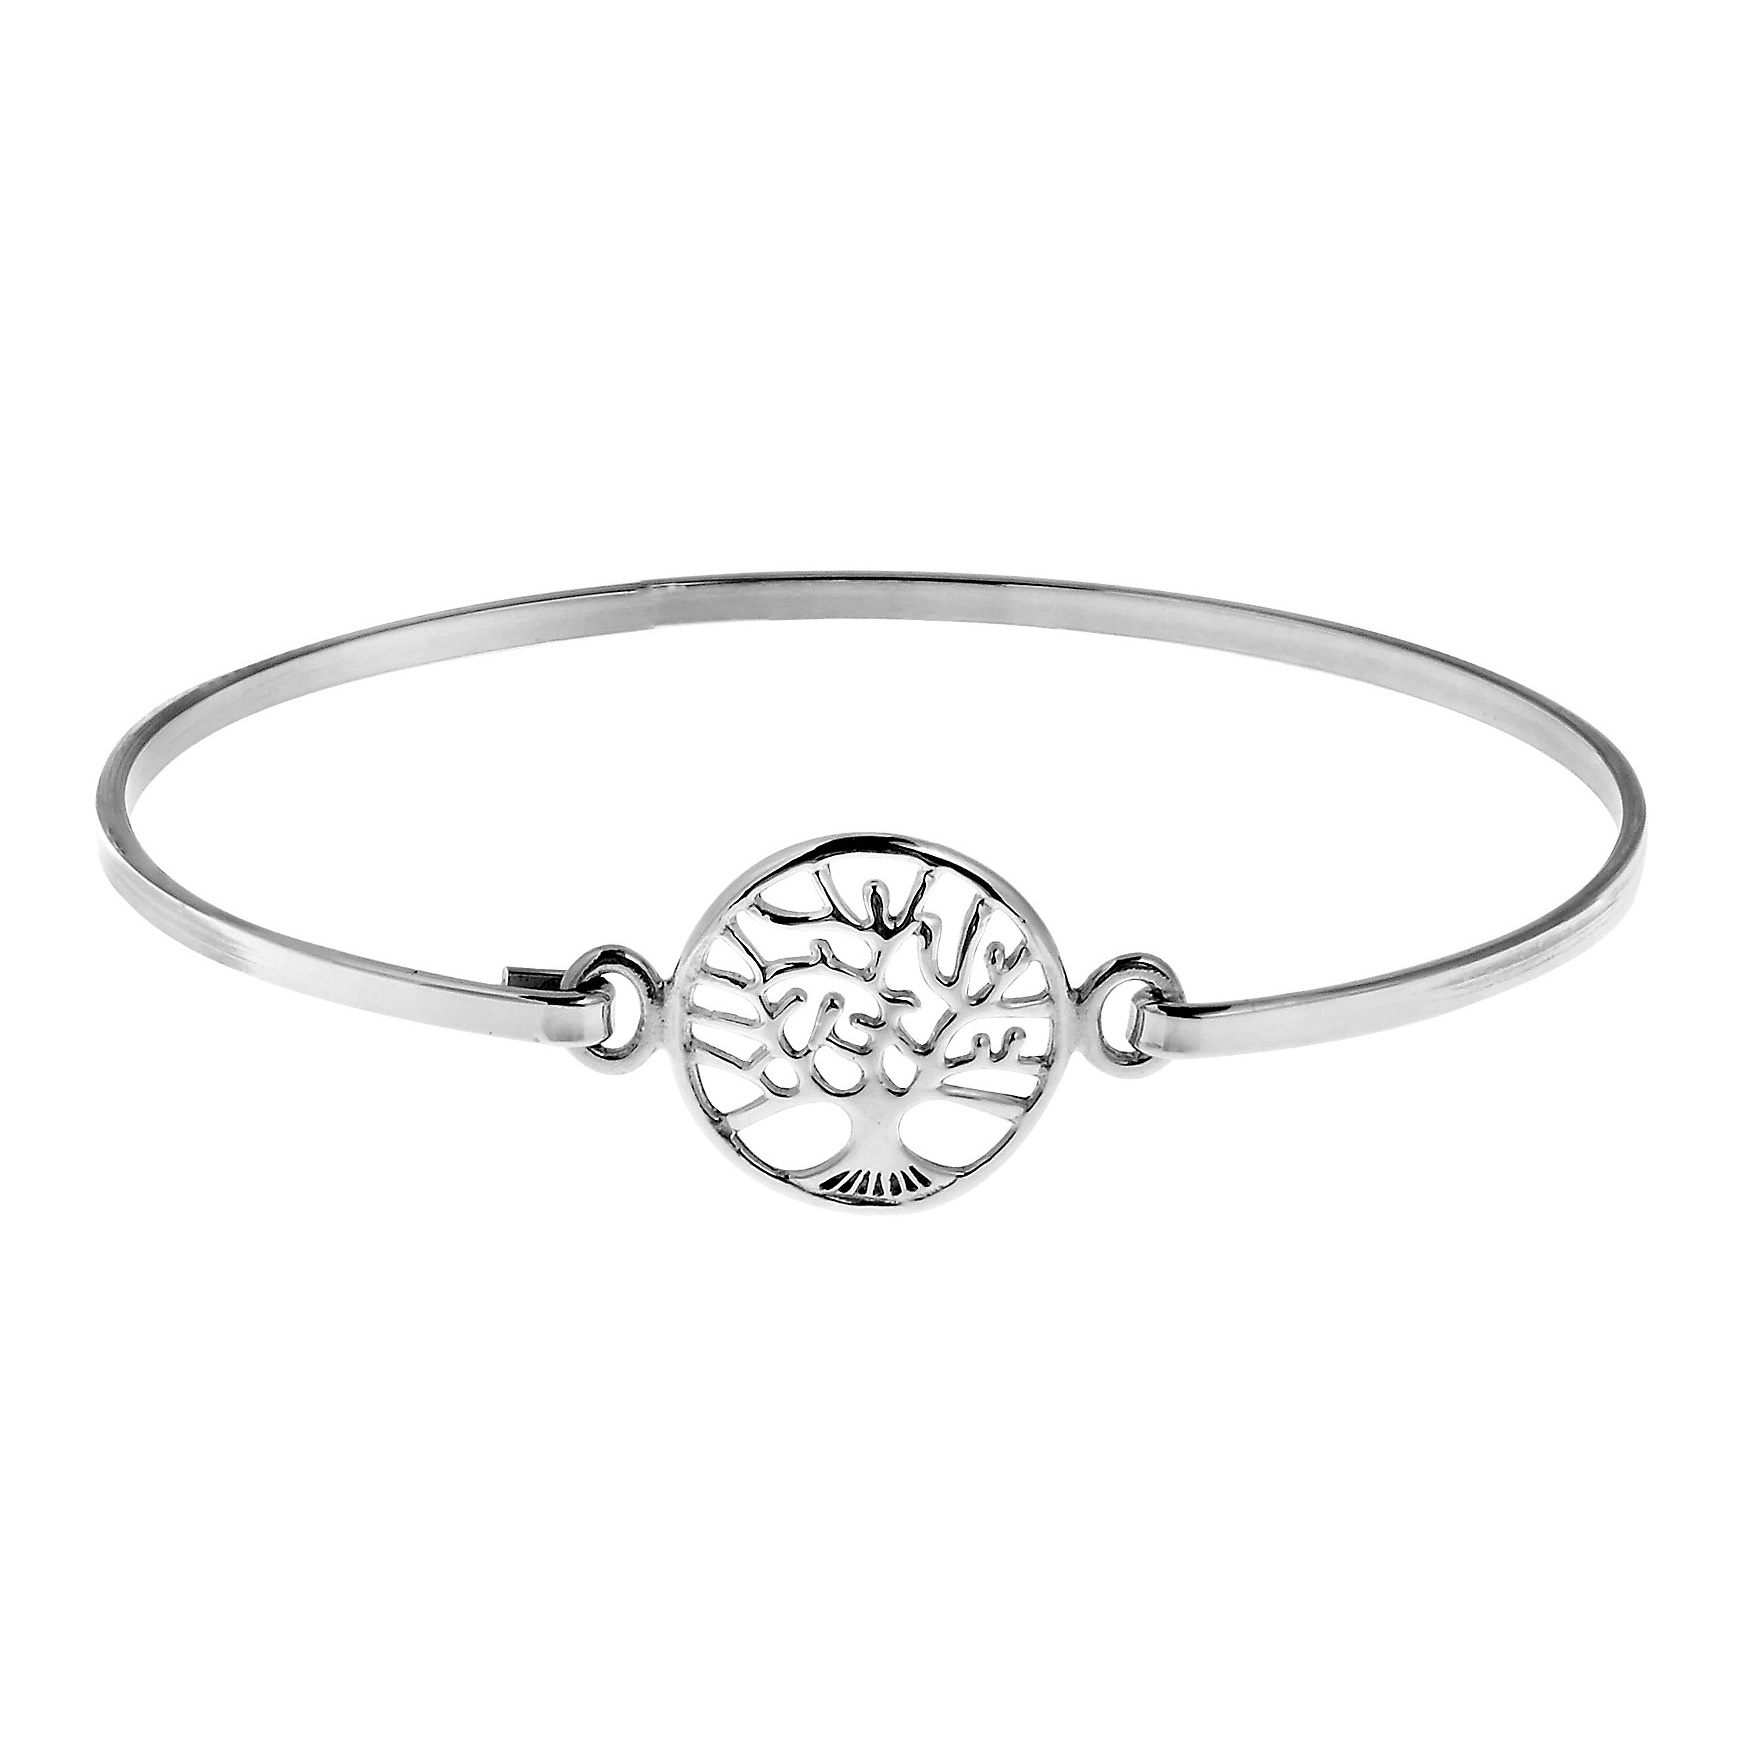 Buy Sterling Silver Tree of Life Bracelet at ChakraCollections.com